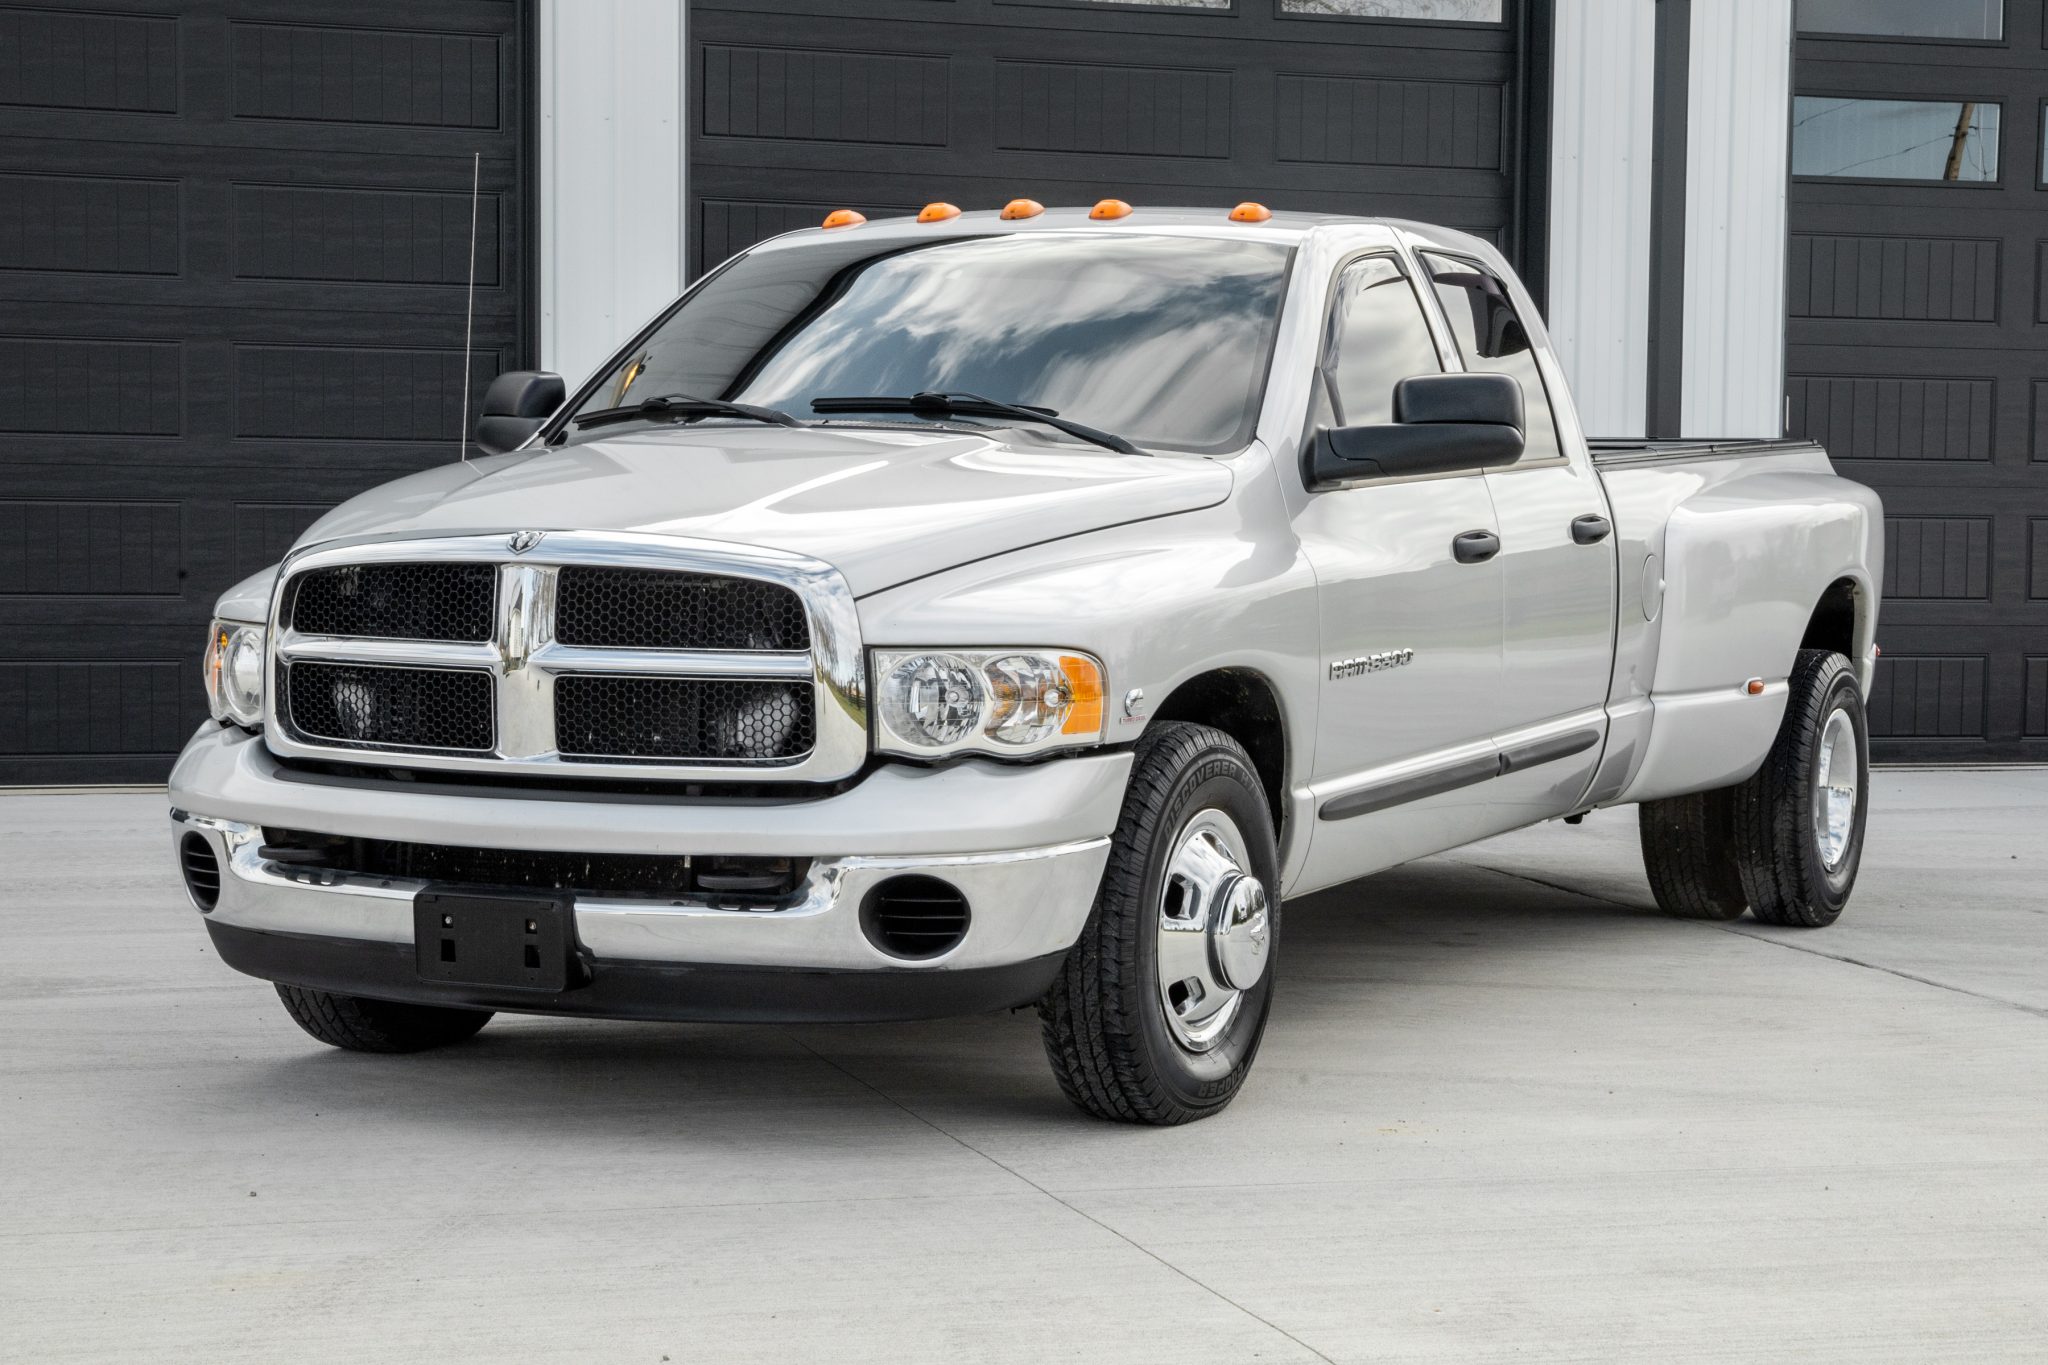 2004 Dodge Ram 3500 Quad Cab Dually Cummins for sale on BaT Auctions - sold  for $34,000 on April 27, 2022 (Lot #71,756) | Bring a Trailer